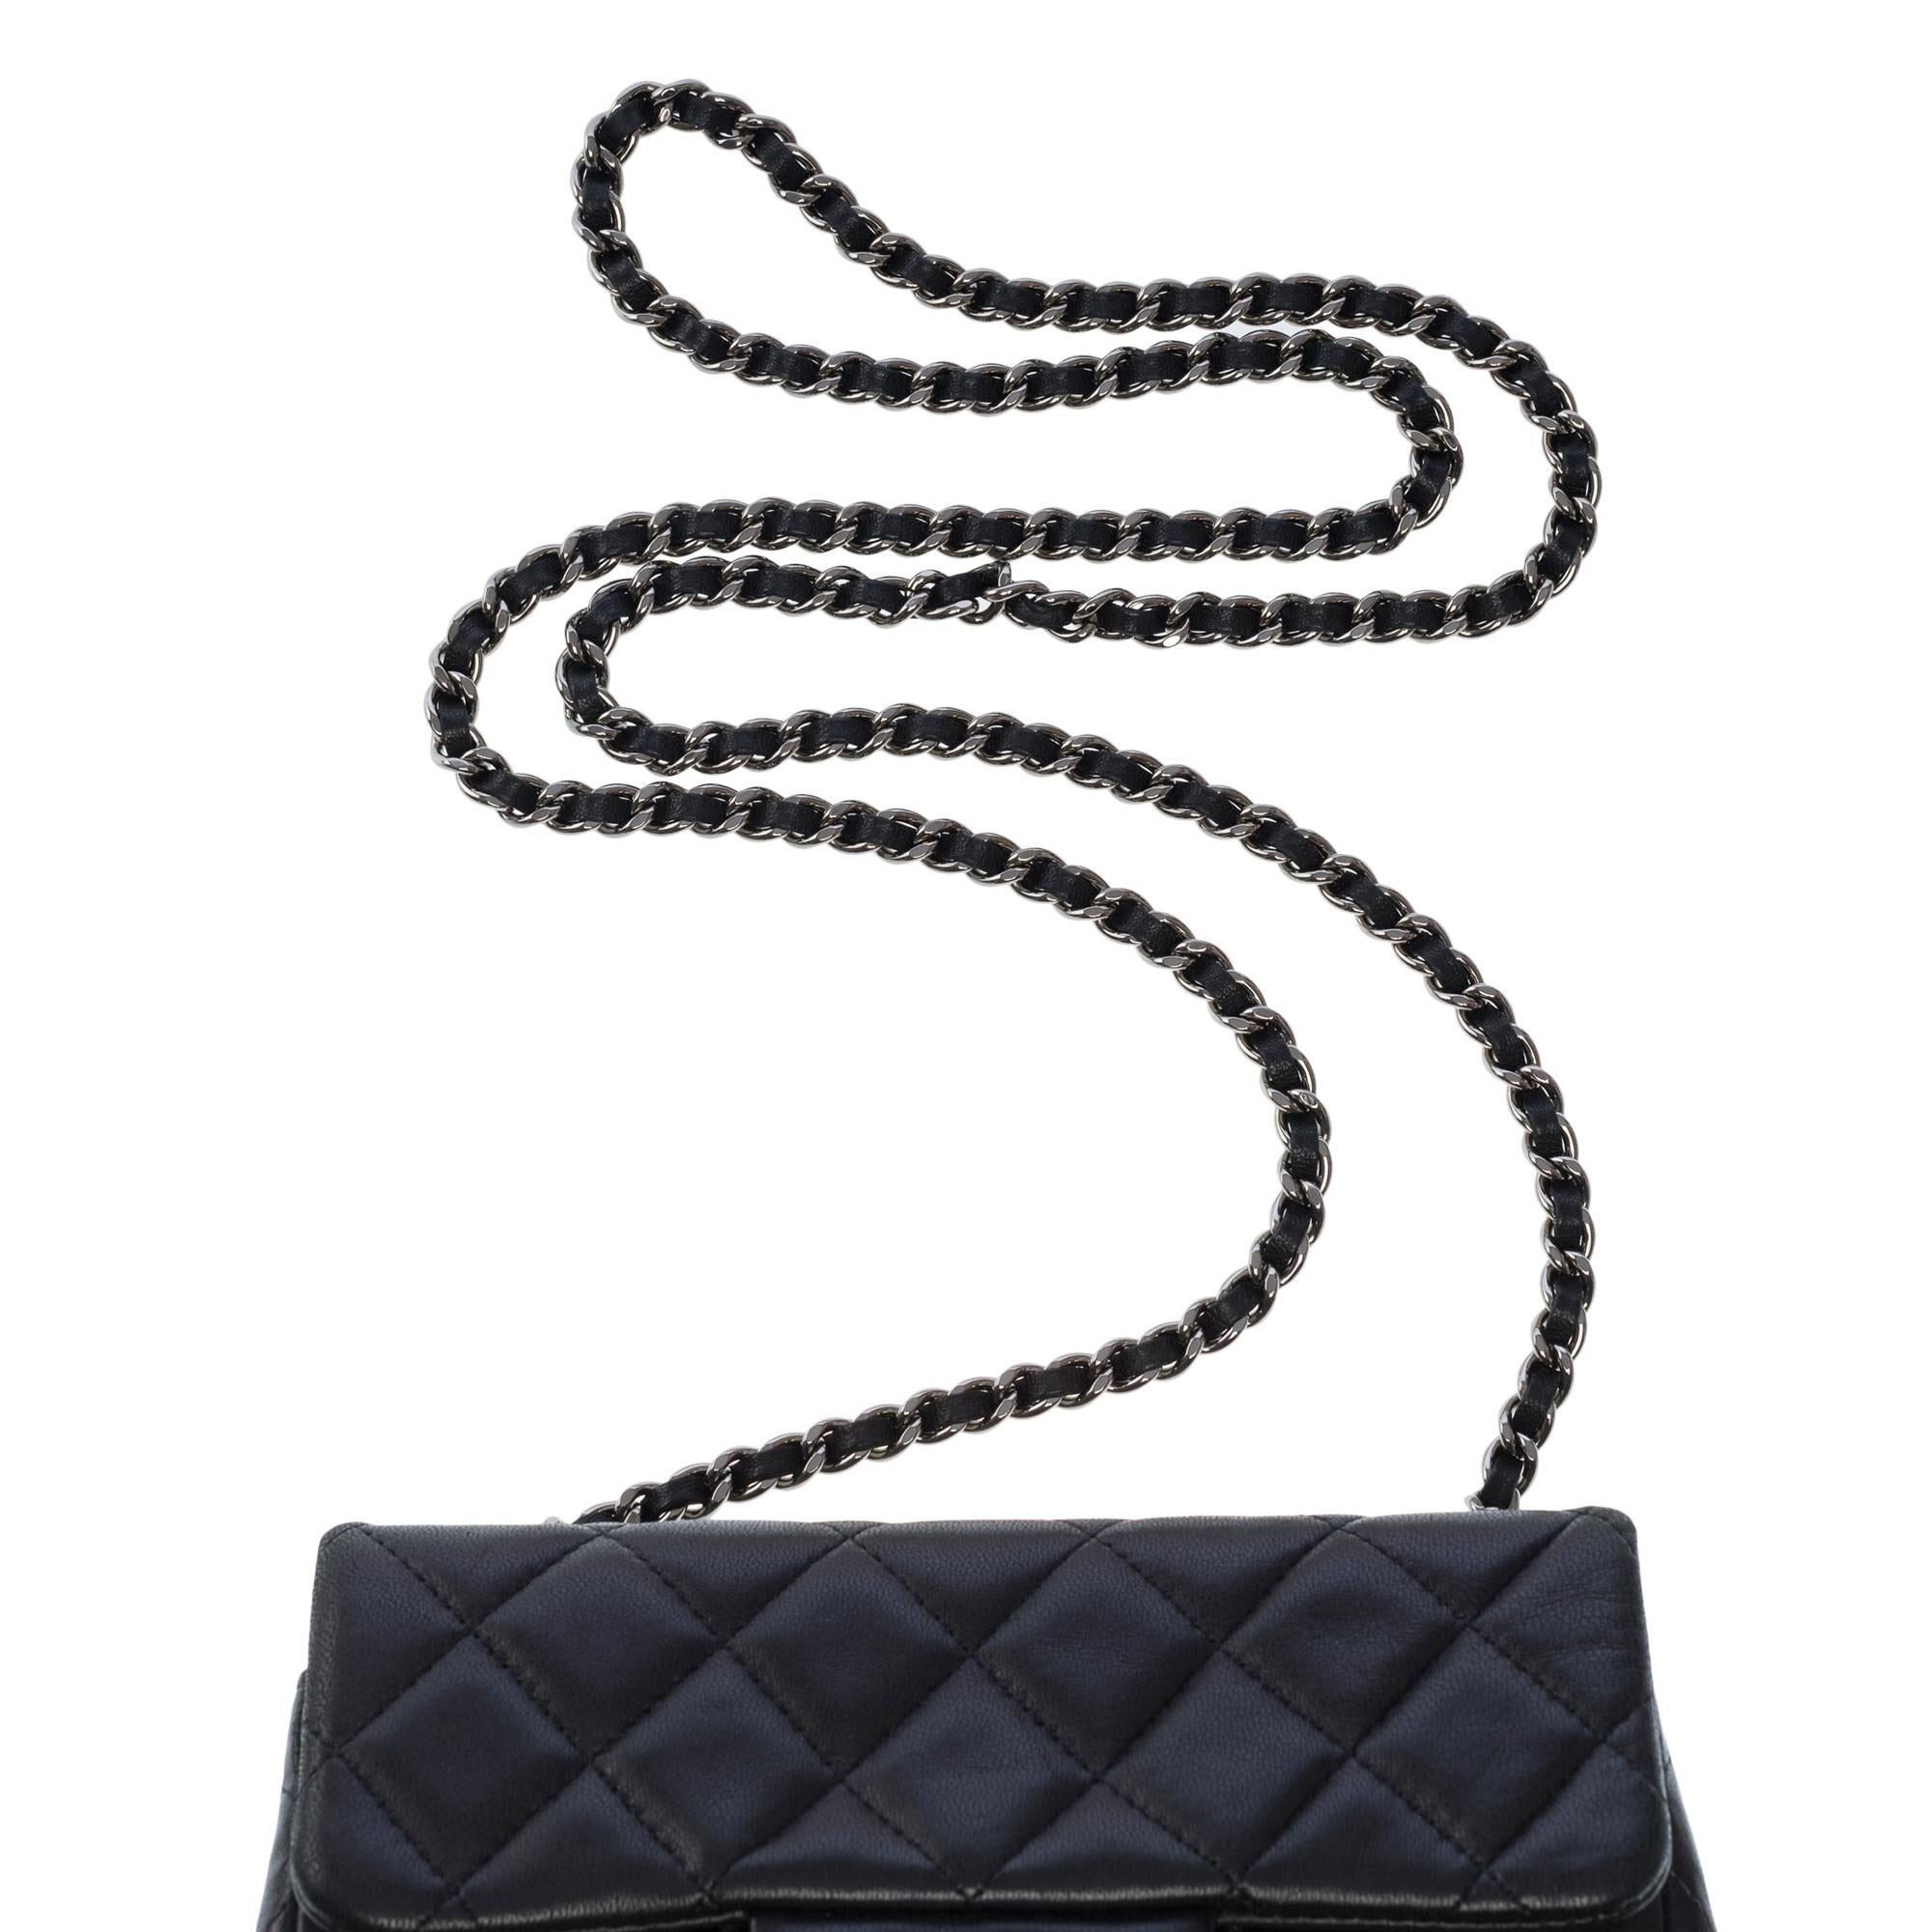 Beautiful Chanel Timeless Mini shoulder Flap bag in Black quilted lambskin, BSHW 6